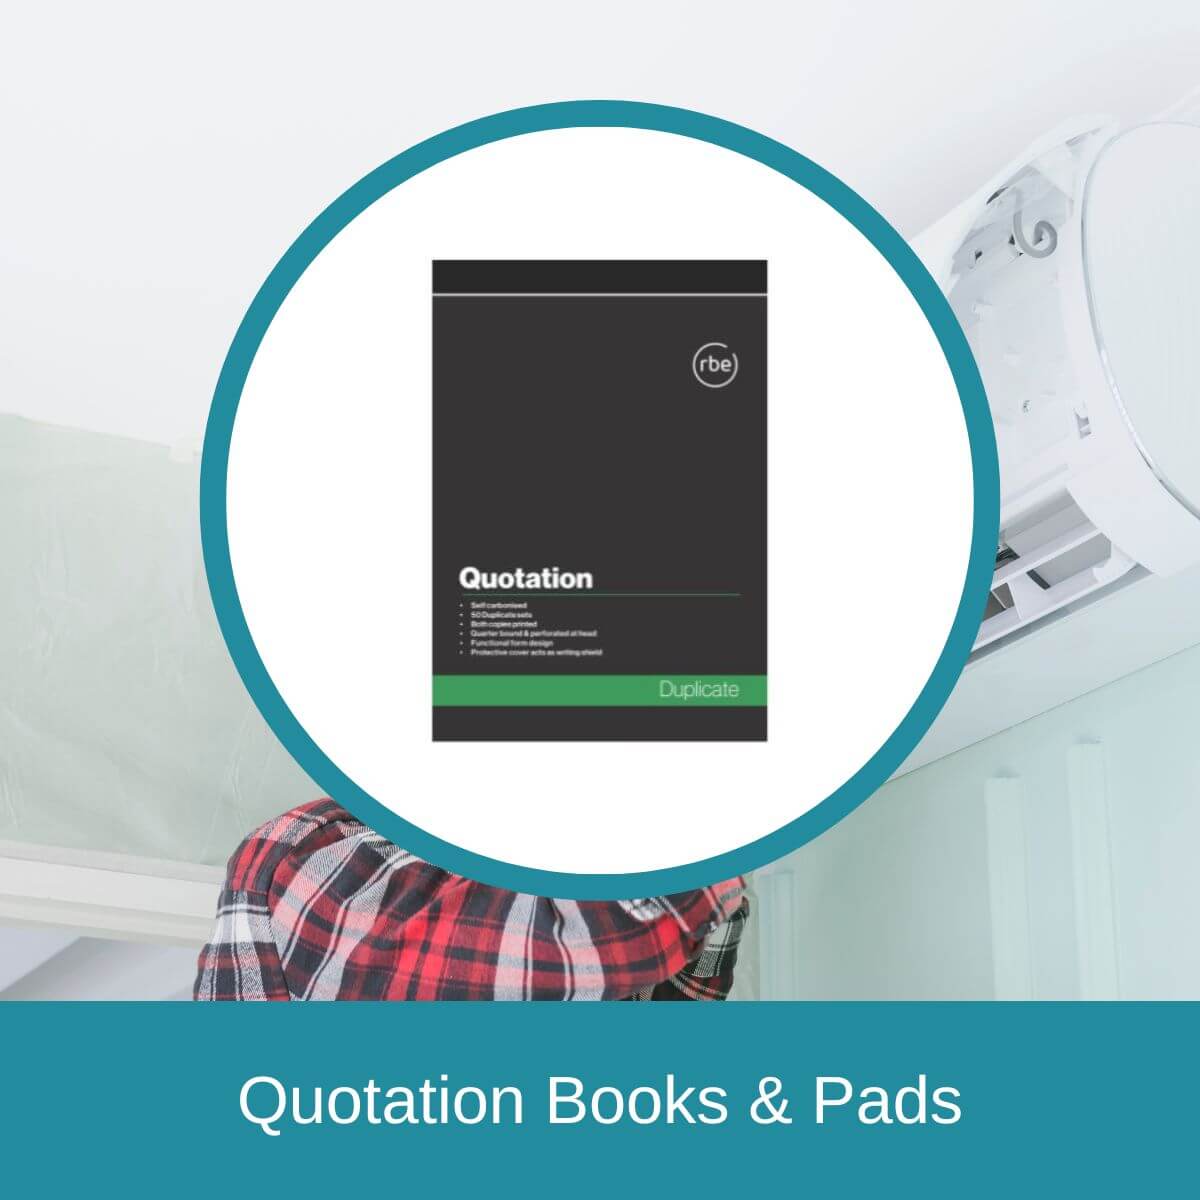 Quotation Books & Pads Product Options